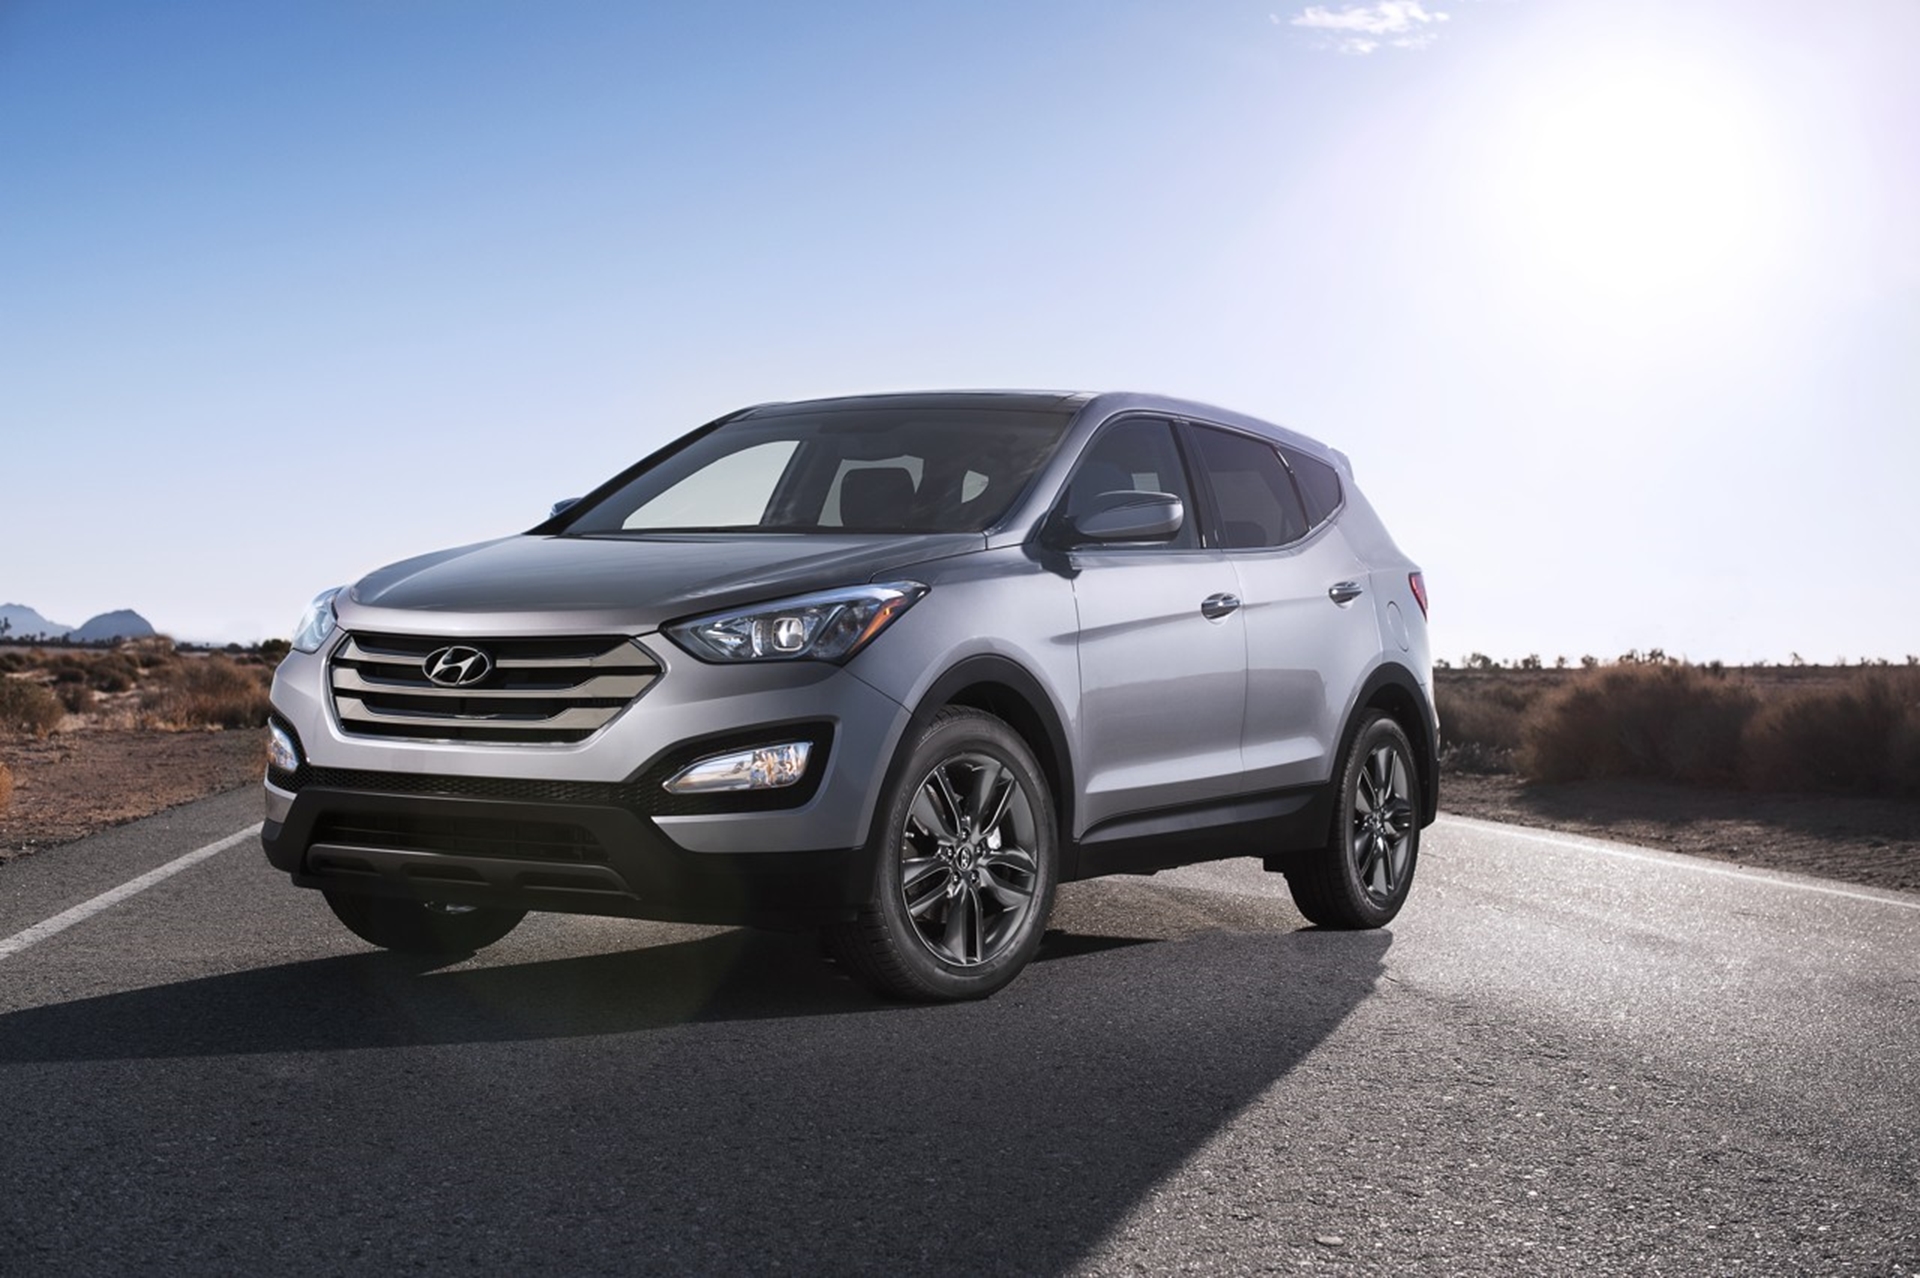 All-New Hyundai Santa Fe Lineup Reinvents the family CUV Landscape